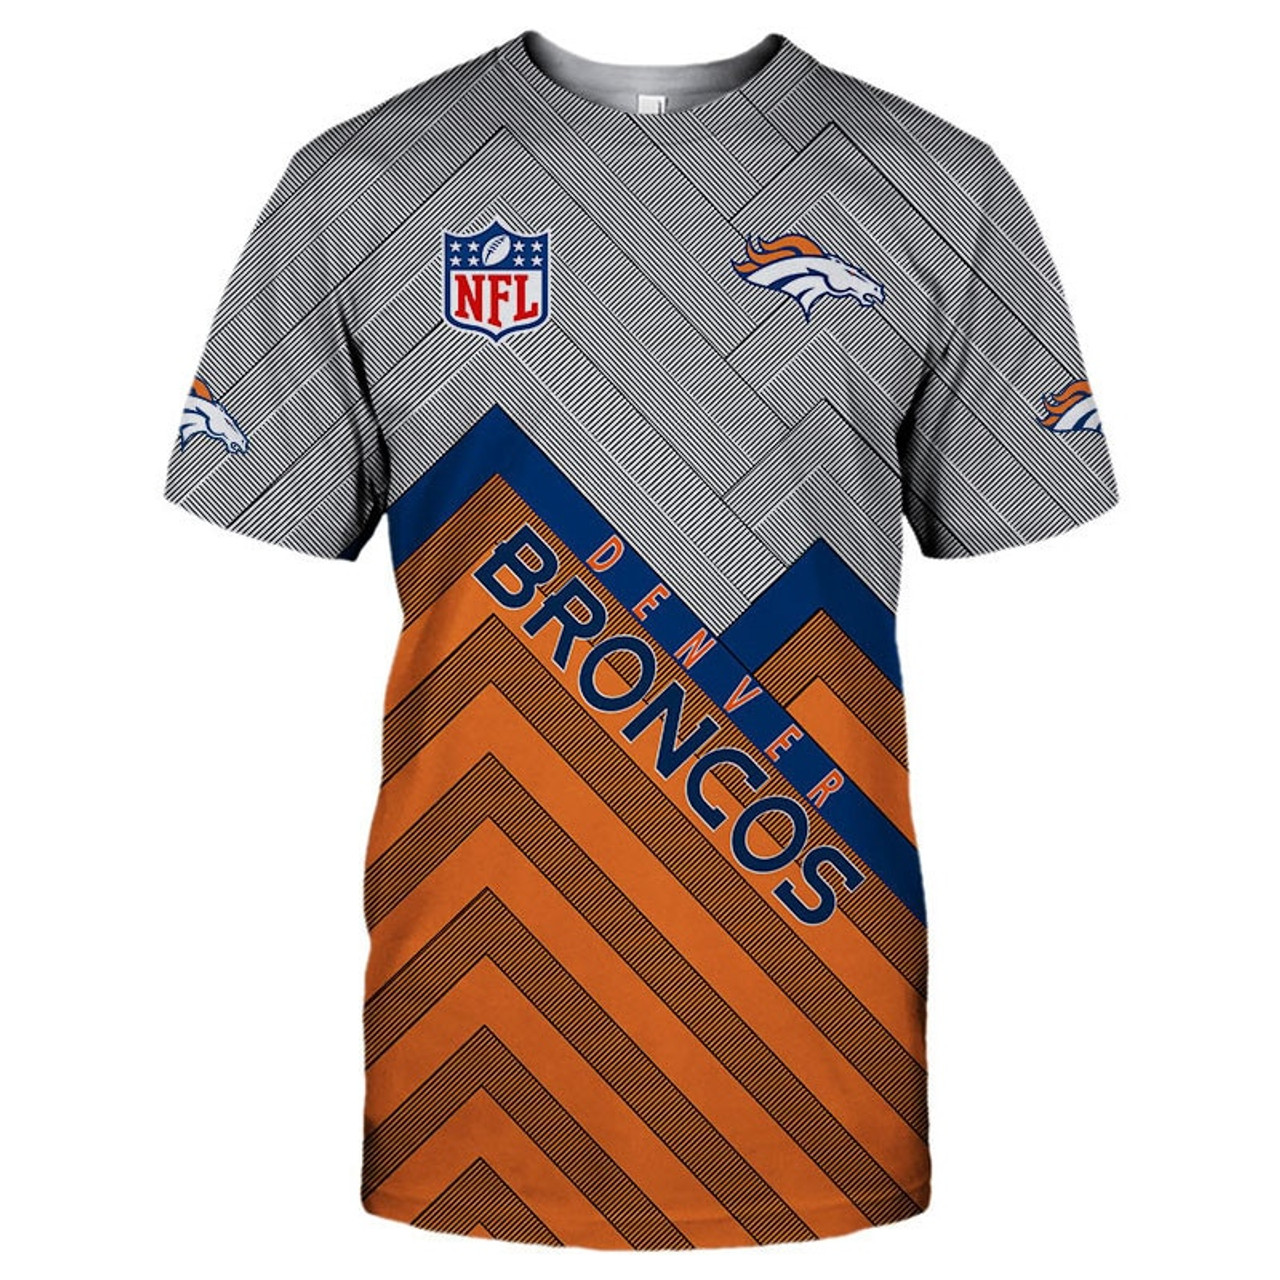  **(OFFICIAL-N.F.L.DENVER-BRONCOS-TEAM-TEES/NICE-3D-CUSTOM-BRONCOS-LOGOS & OFFICIAL-BRONCOS-CLASSIC-TEAM-COLORS/NICE-3D-DETAILED-GRAPHIC-PRINTED-DOUBLE-SIDED/ALL-OVER-ENTIRE-TEE-SHIRT-PRINTED-DESIGN/TRENDY-PREMIUM-N.F.L.DENVER-BRONCOS-TEES)**